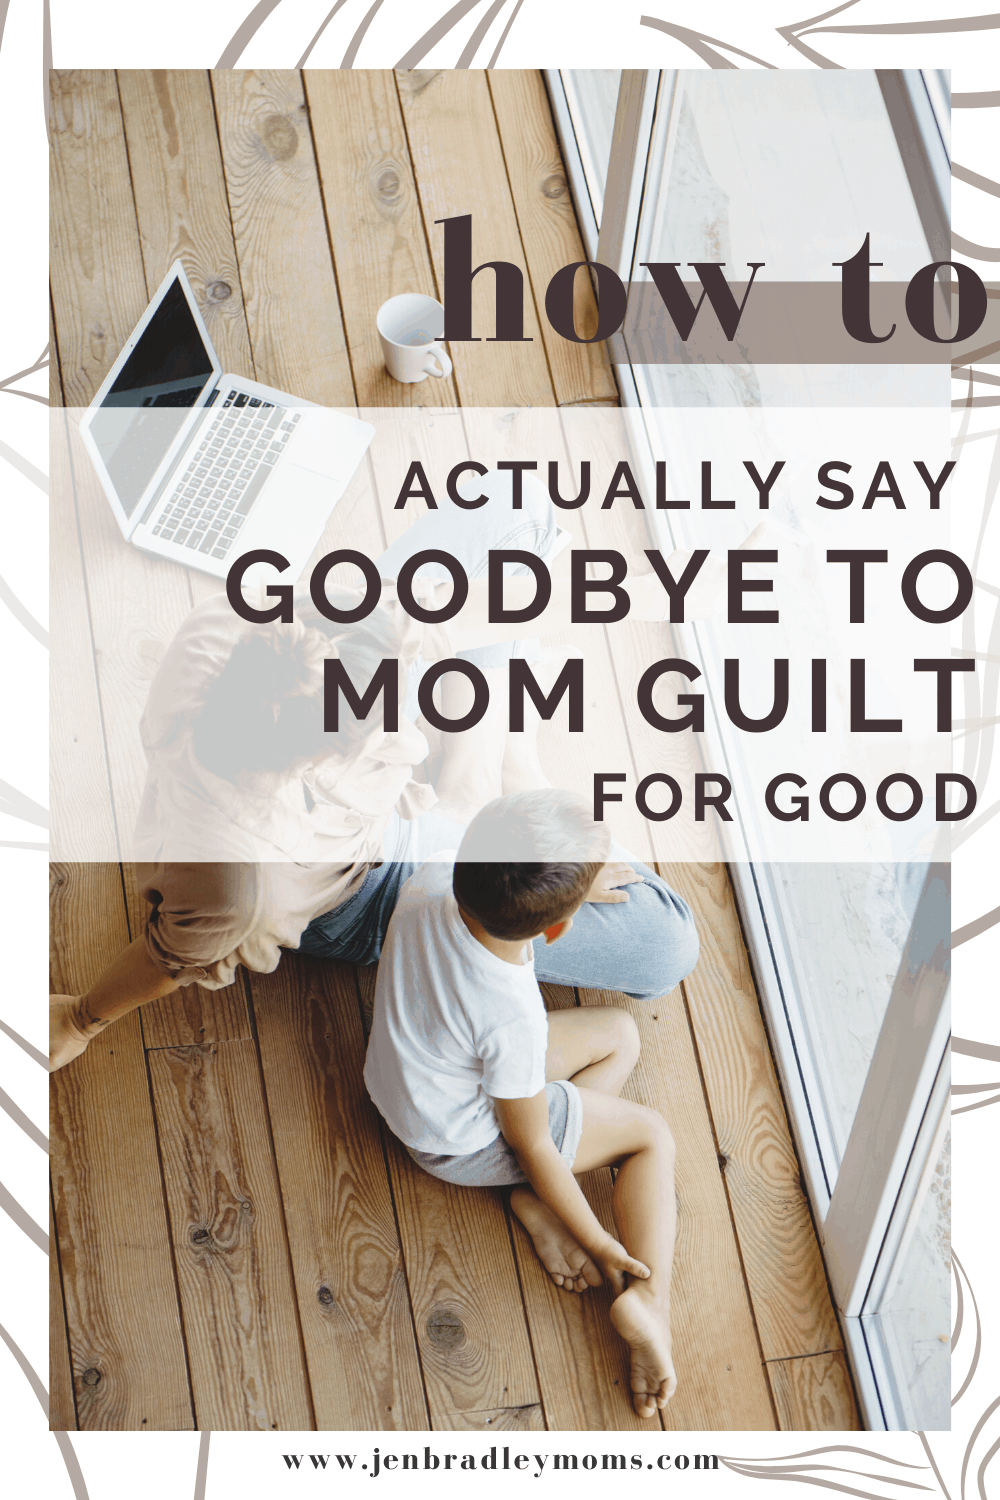 How to Actually Say Goodbye to Mom Guilt Forever